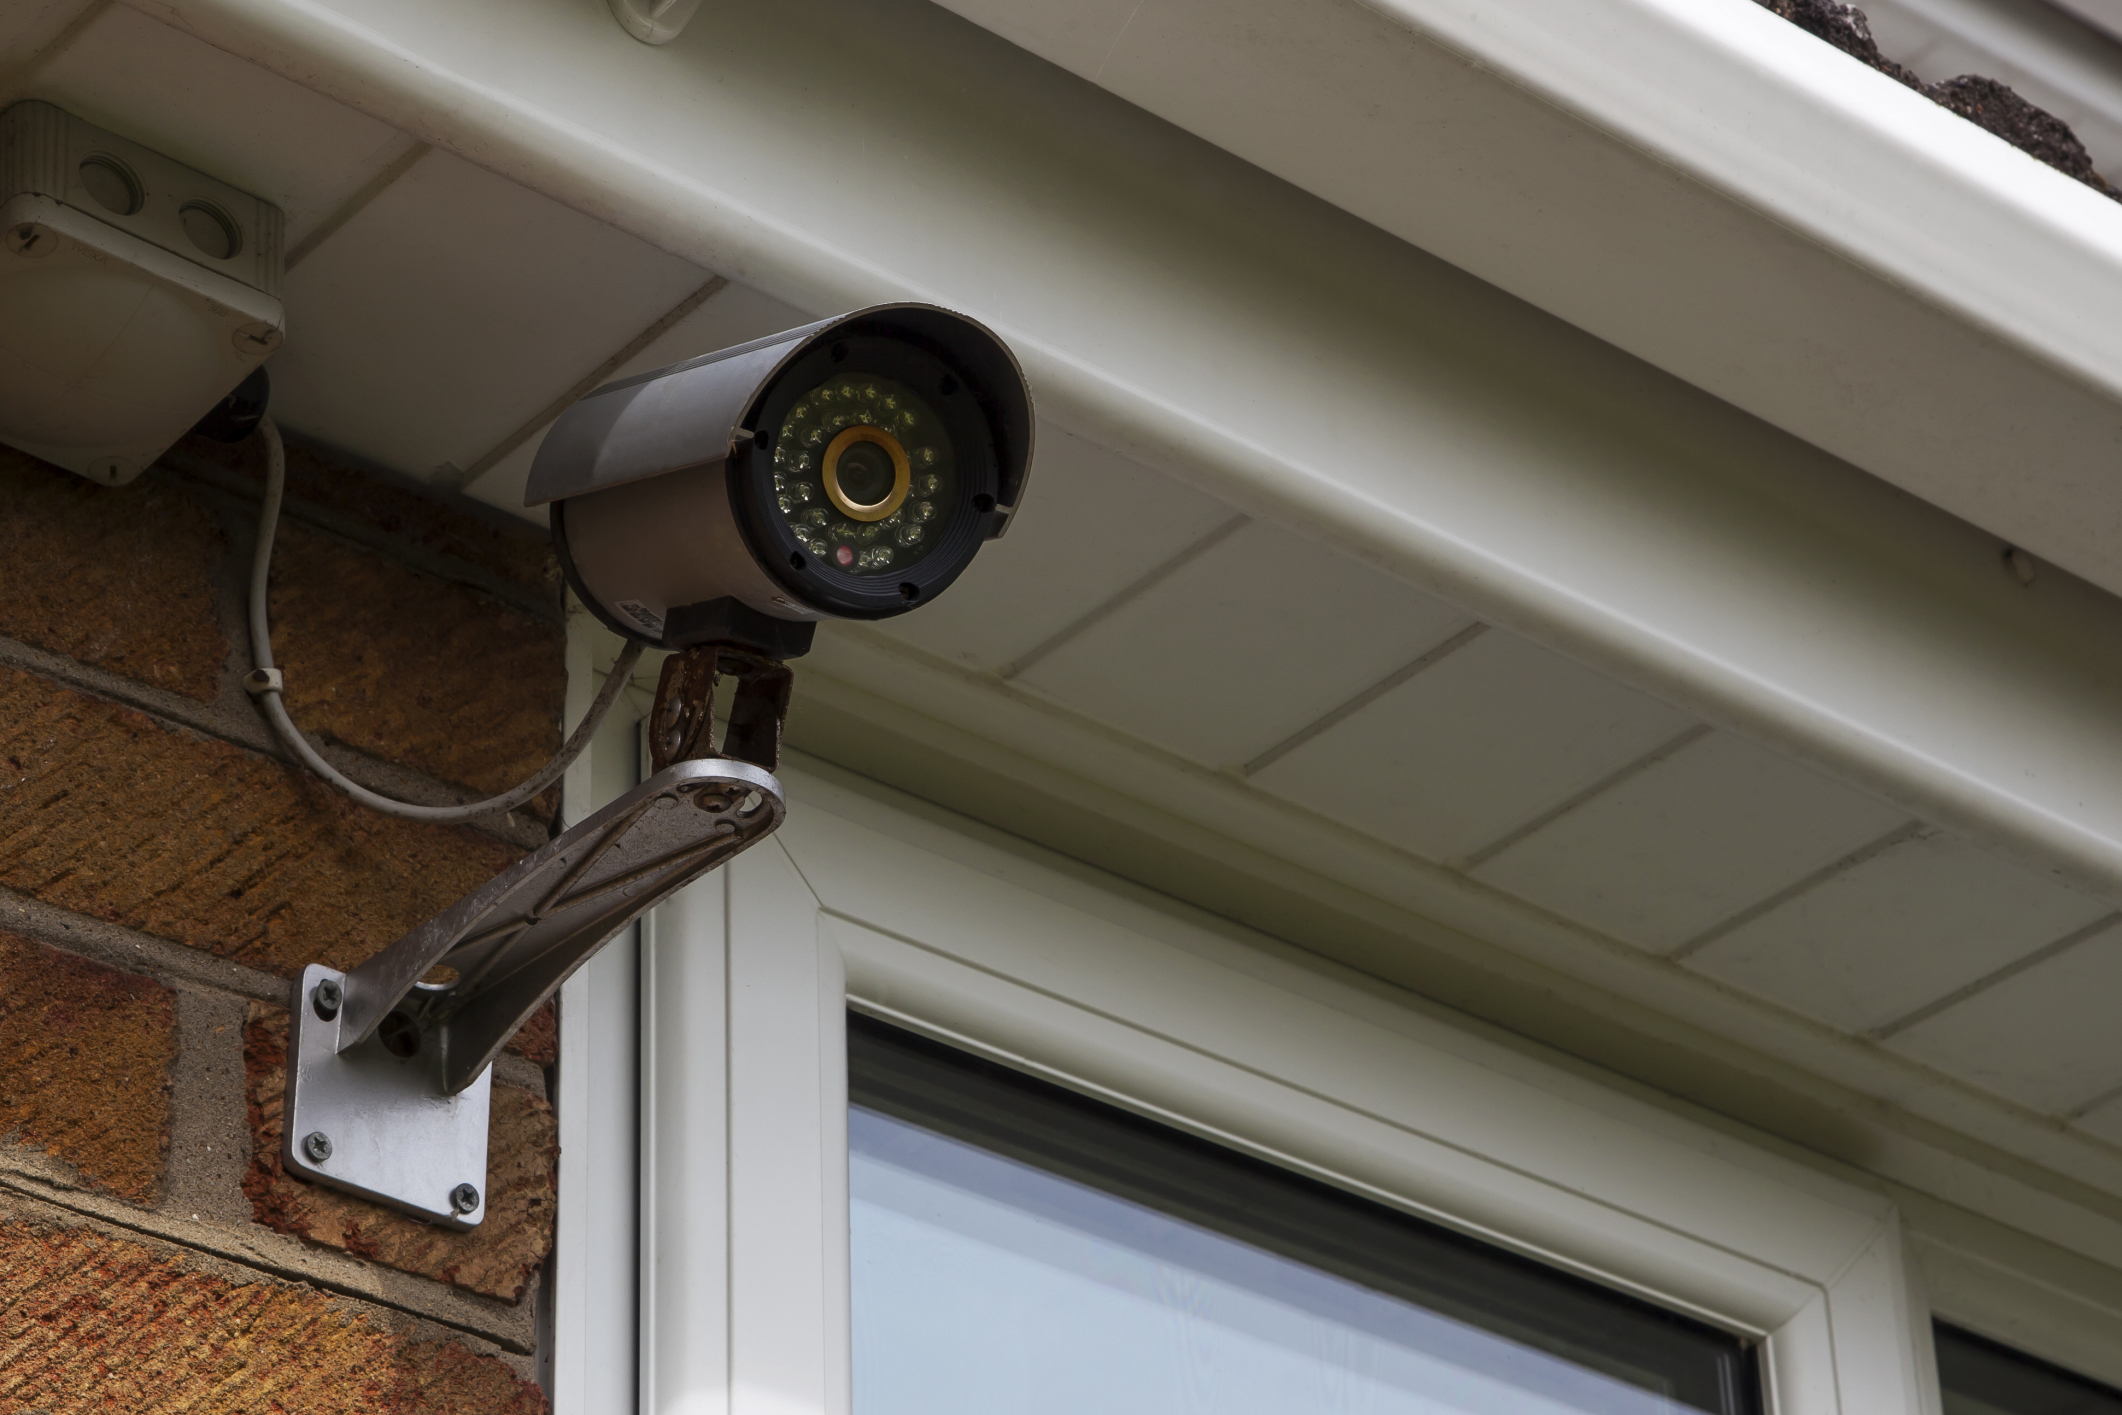 Mayor slates new security cameras for DC public housing after its cameras miss killings